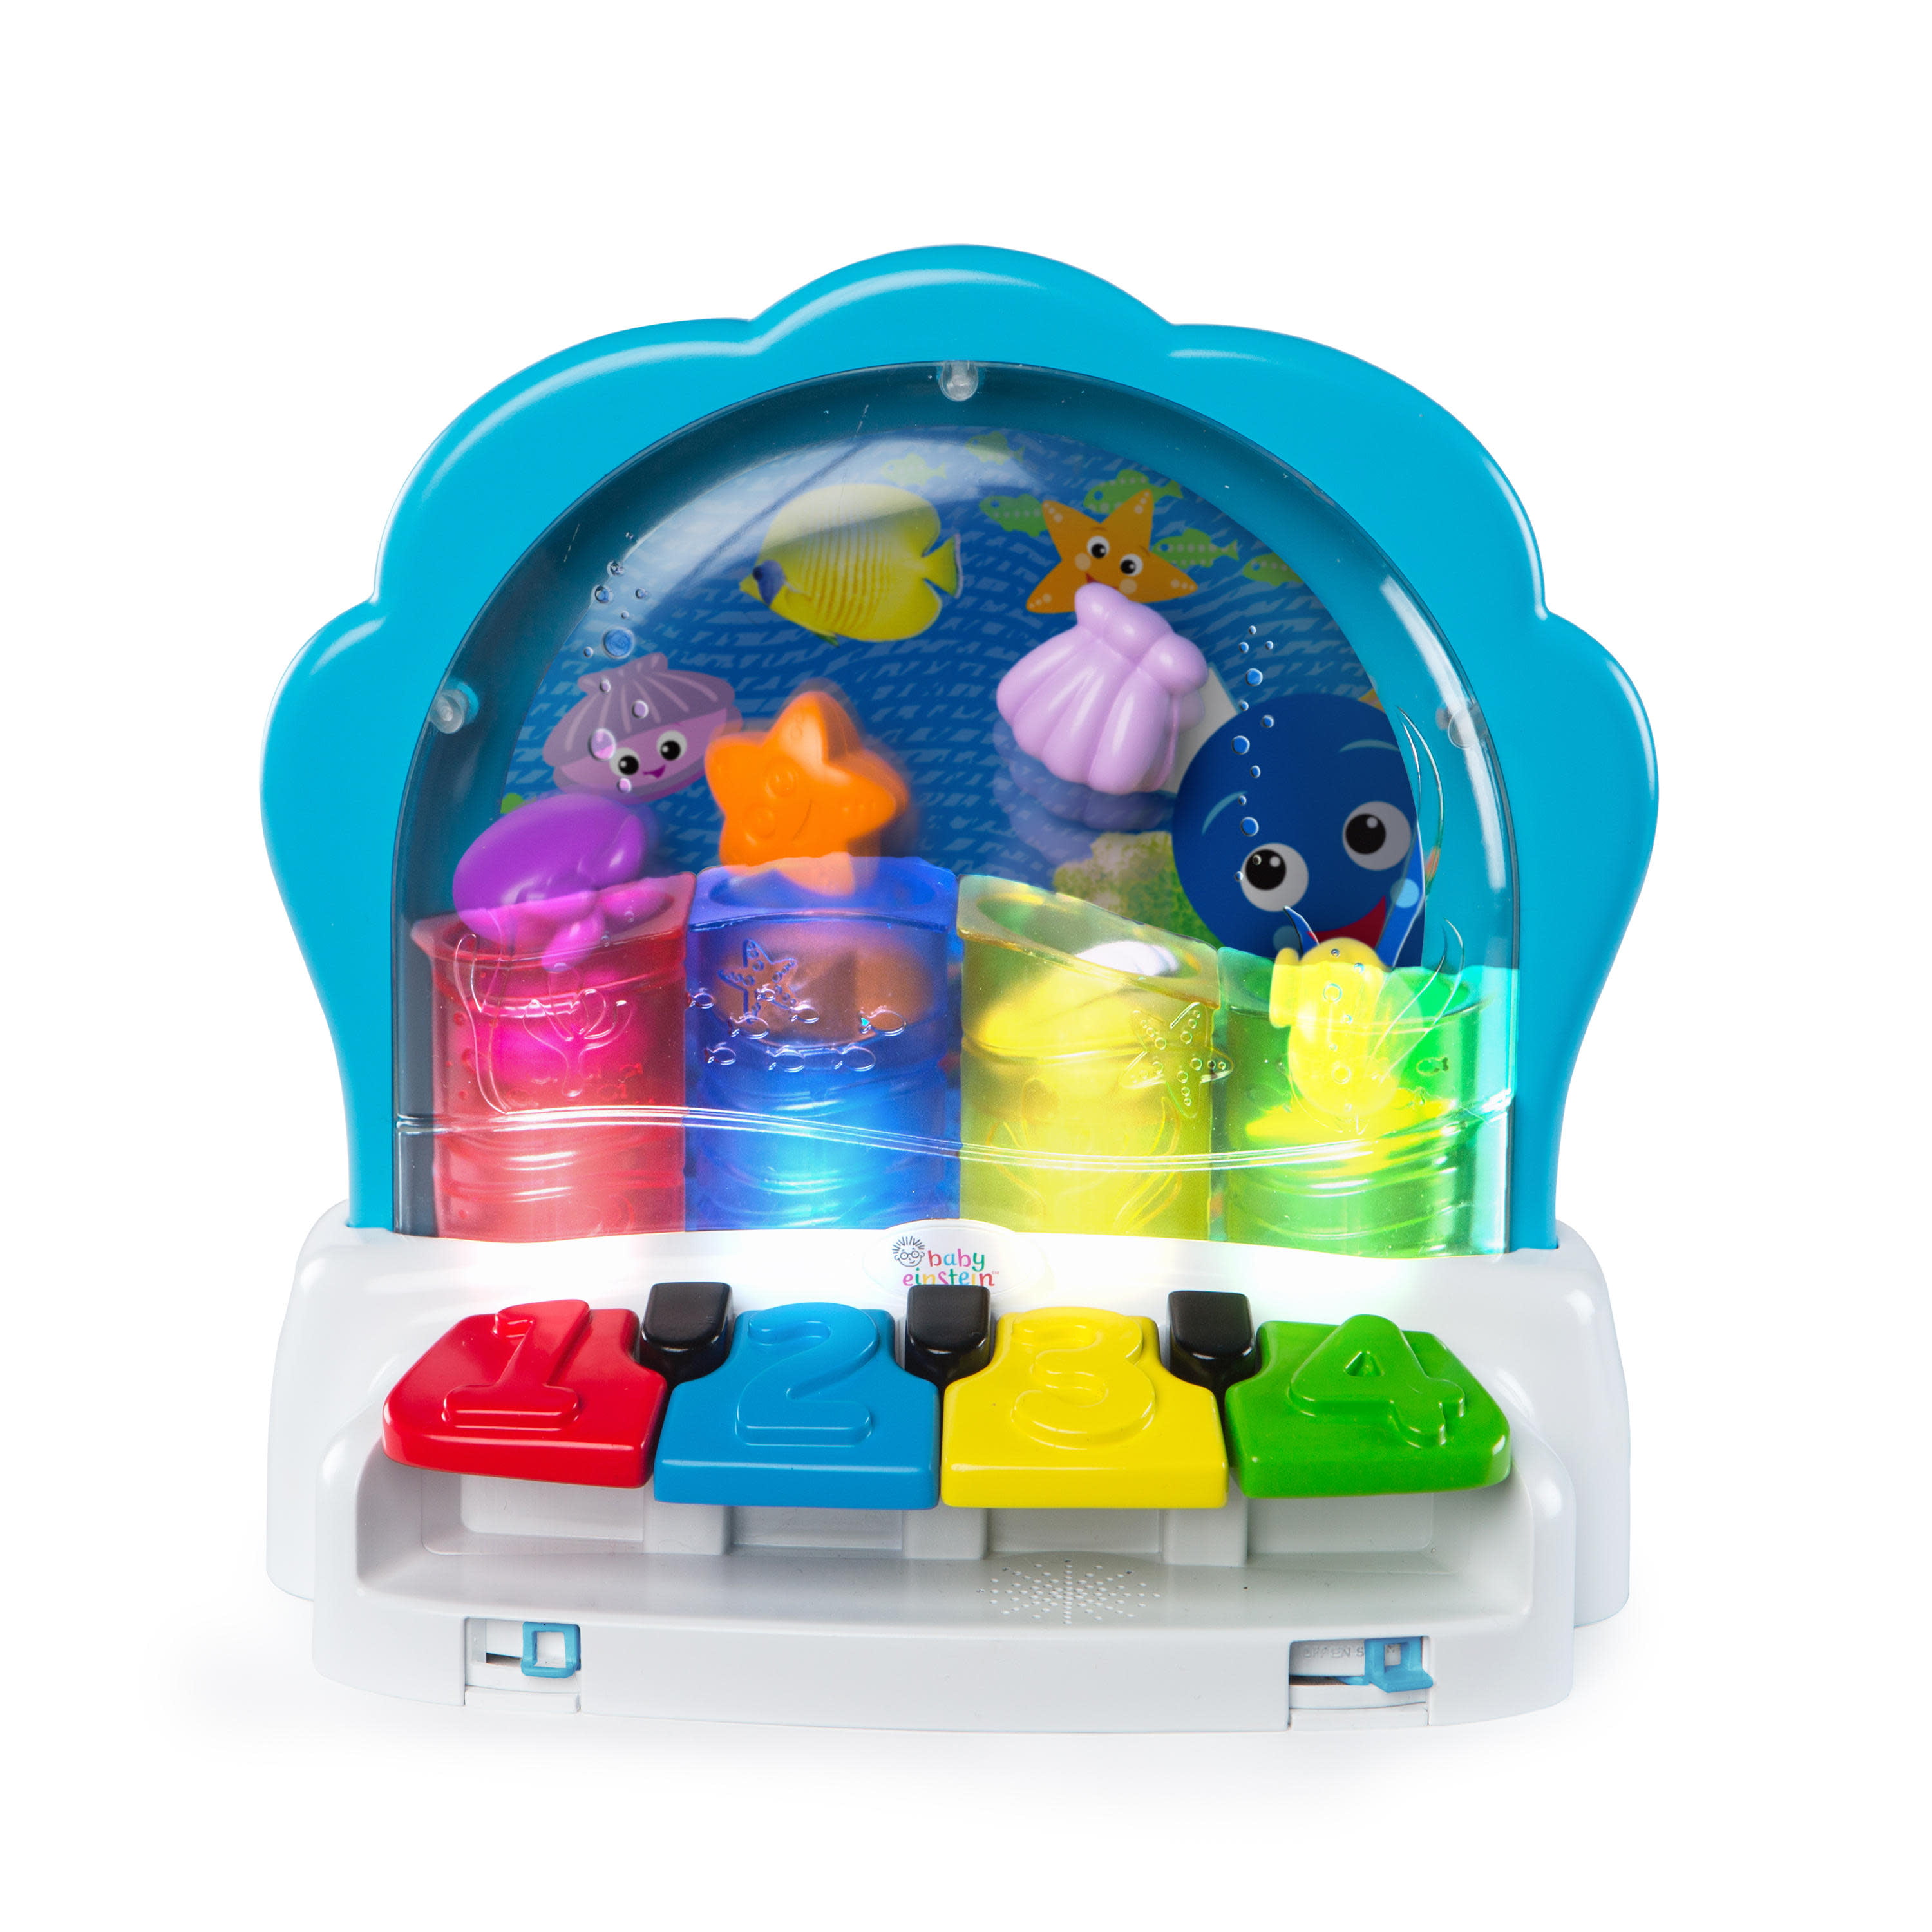 musical toys for babies under 6 months